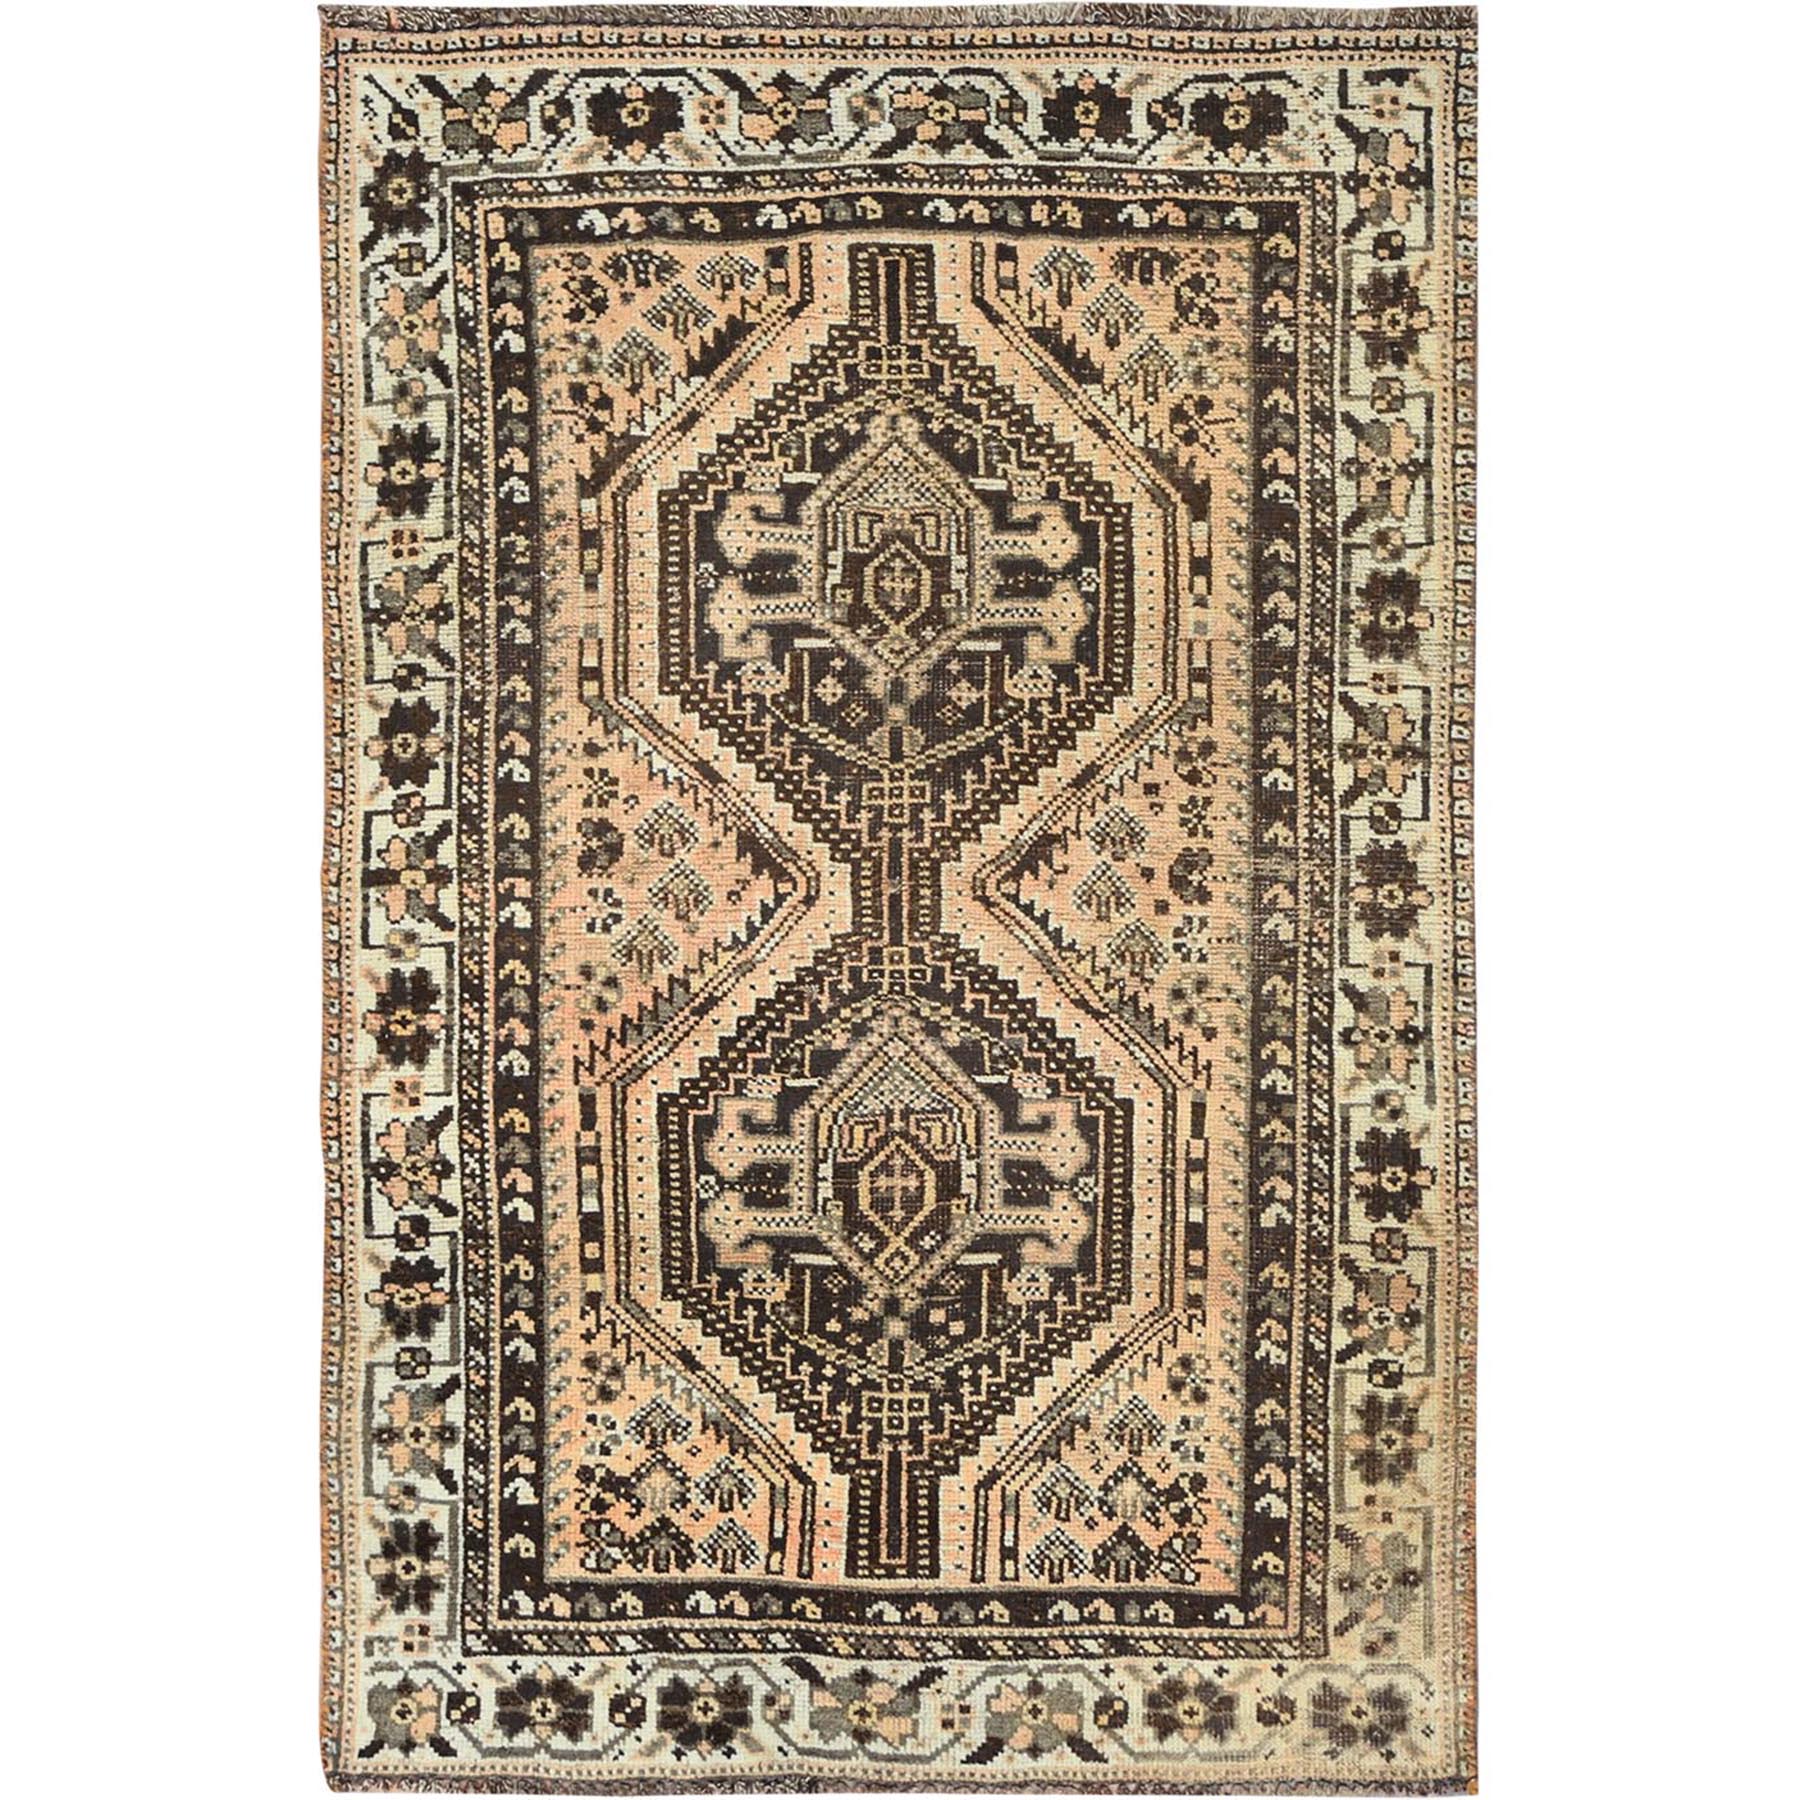  Wool Hand-Knotted Area Rug 3'3